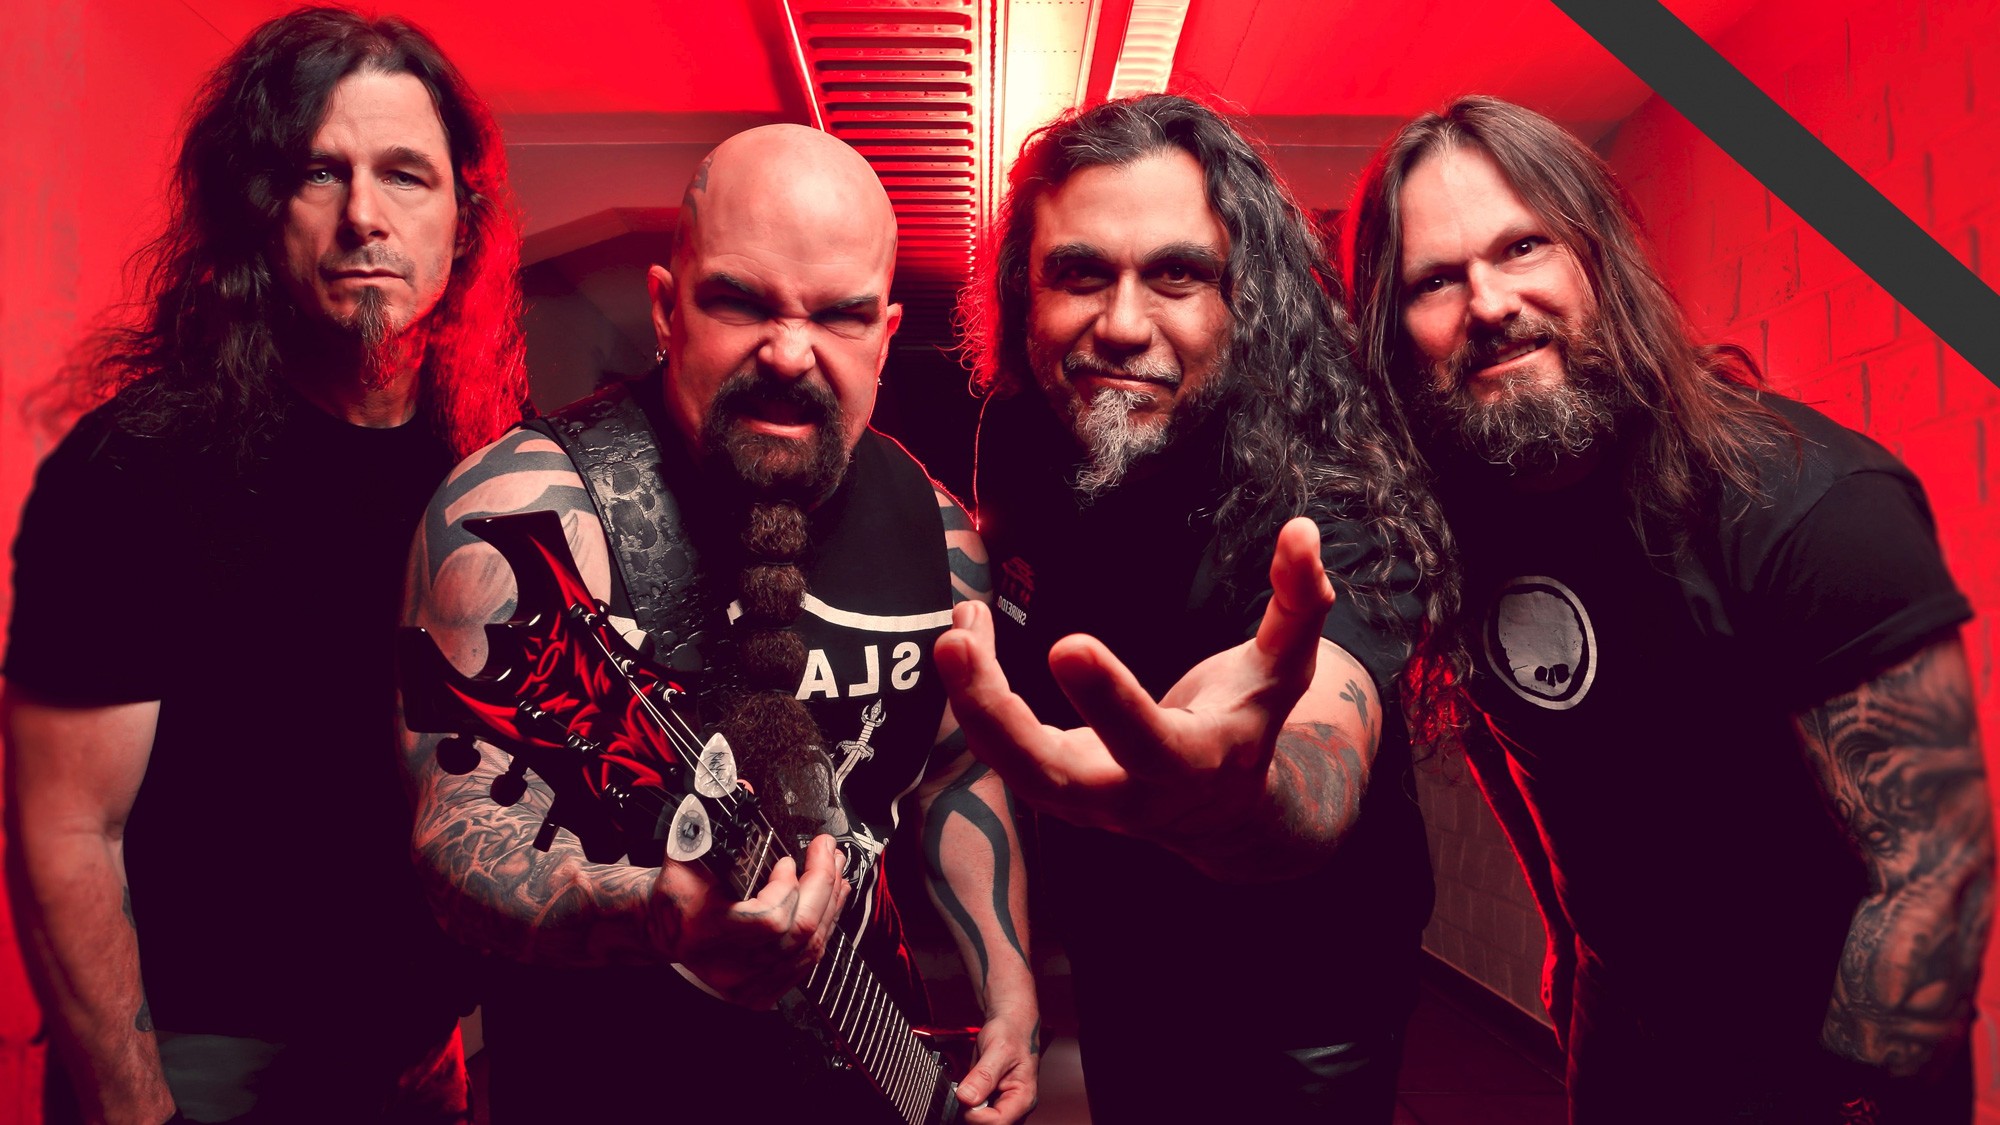 Speed Metal/Heavy Metal Band Slayer in 2016